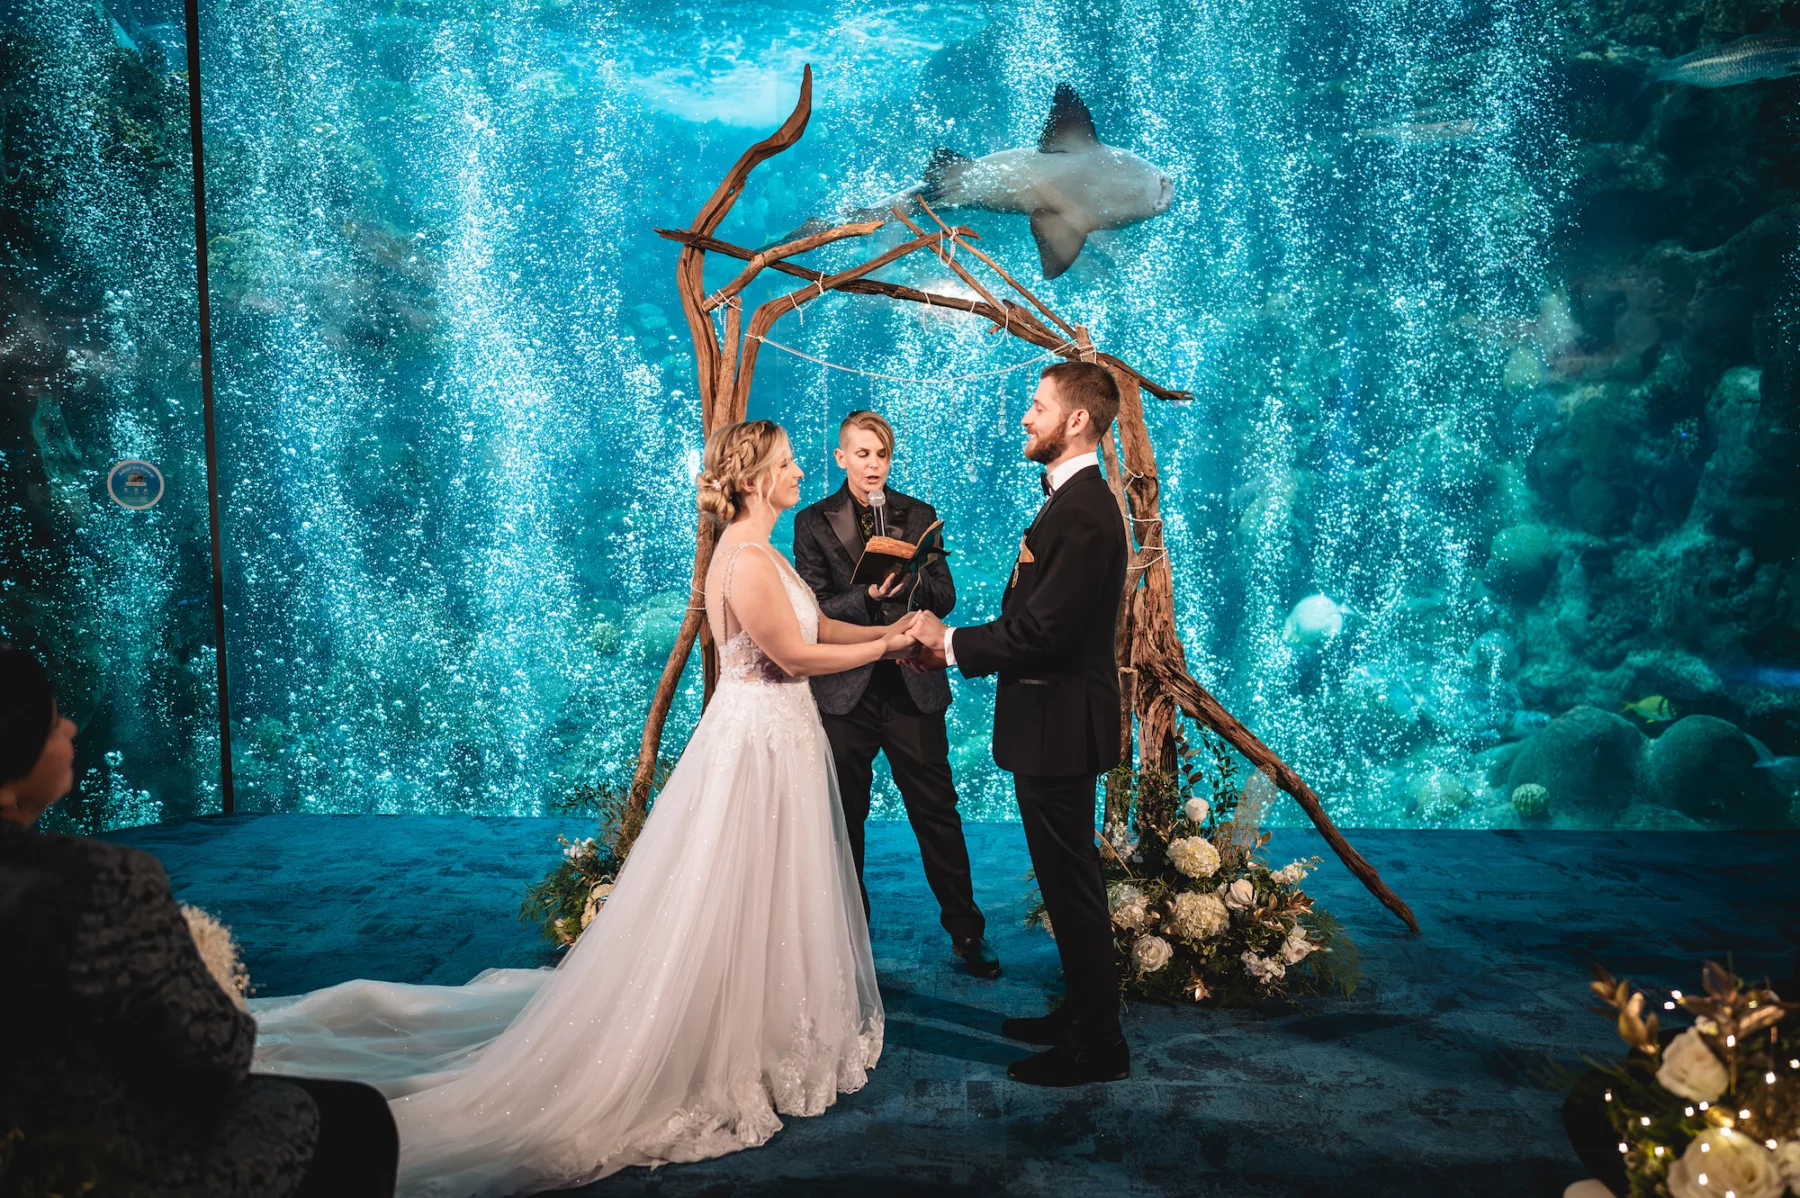 Bubble Curtain Coral Reef Gallery Nautical Fall Wedding Ceremony Inspiration | Drift Wood Arch Ideas | Tampa Bay Event Venue The Florida Aquarium